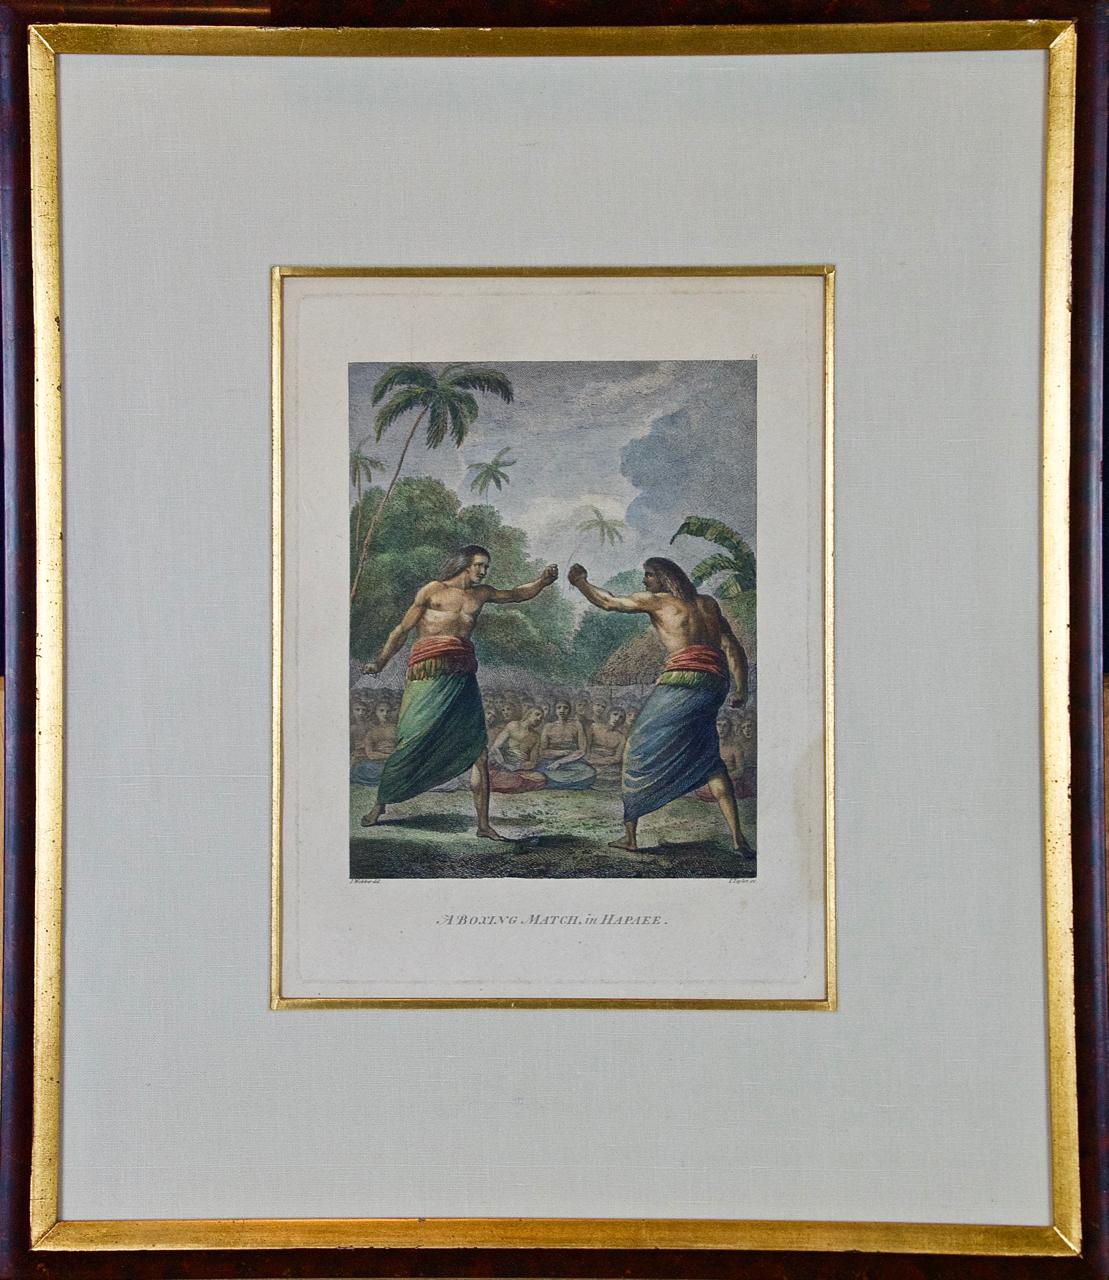 John Webber Landscape Print - "A Boxing Match Hapaee" (Tonga) Engraving of Captain Cook's 3rd Voyage by Webber